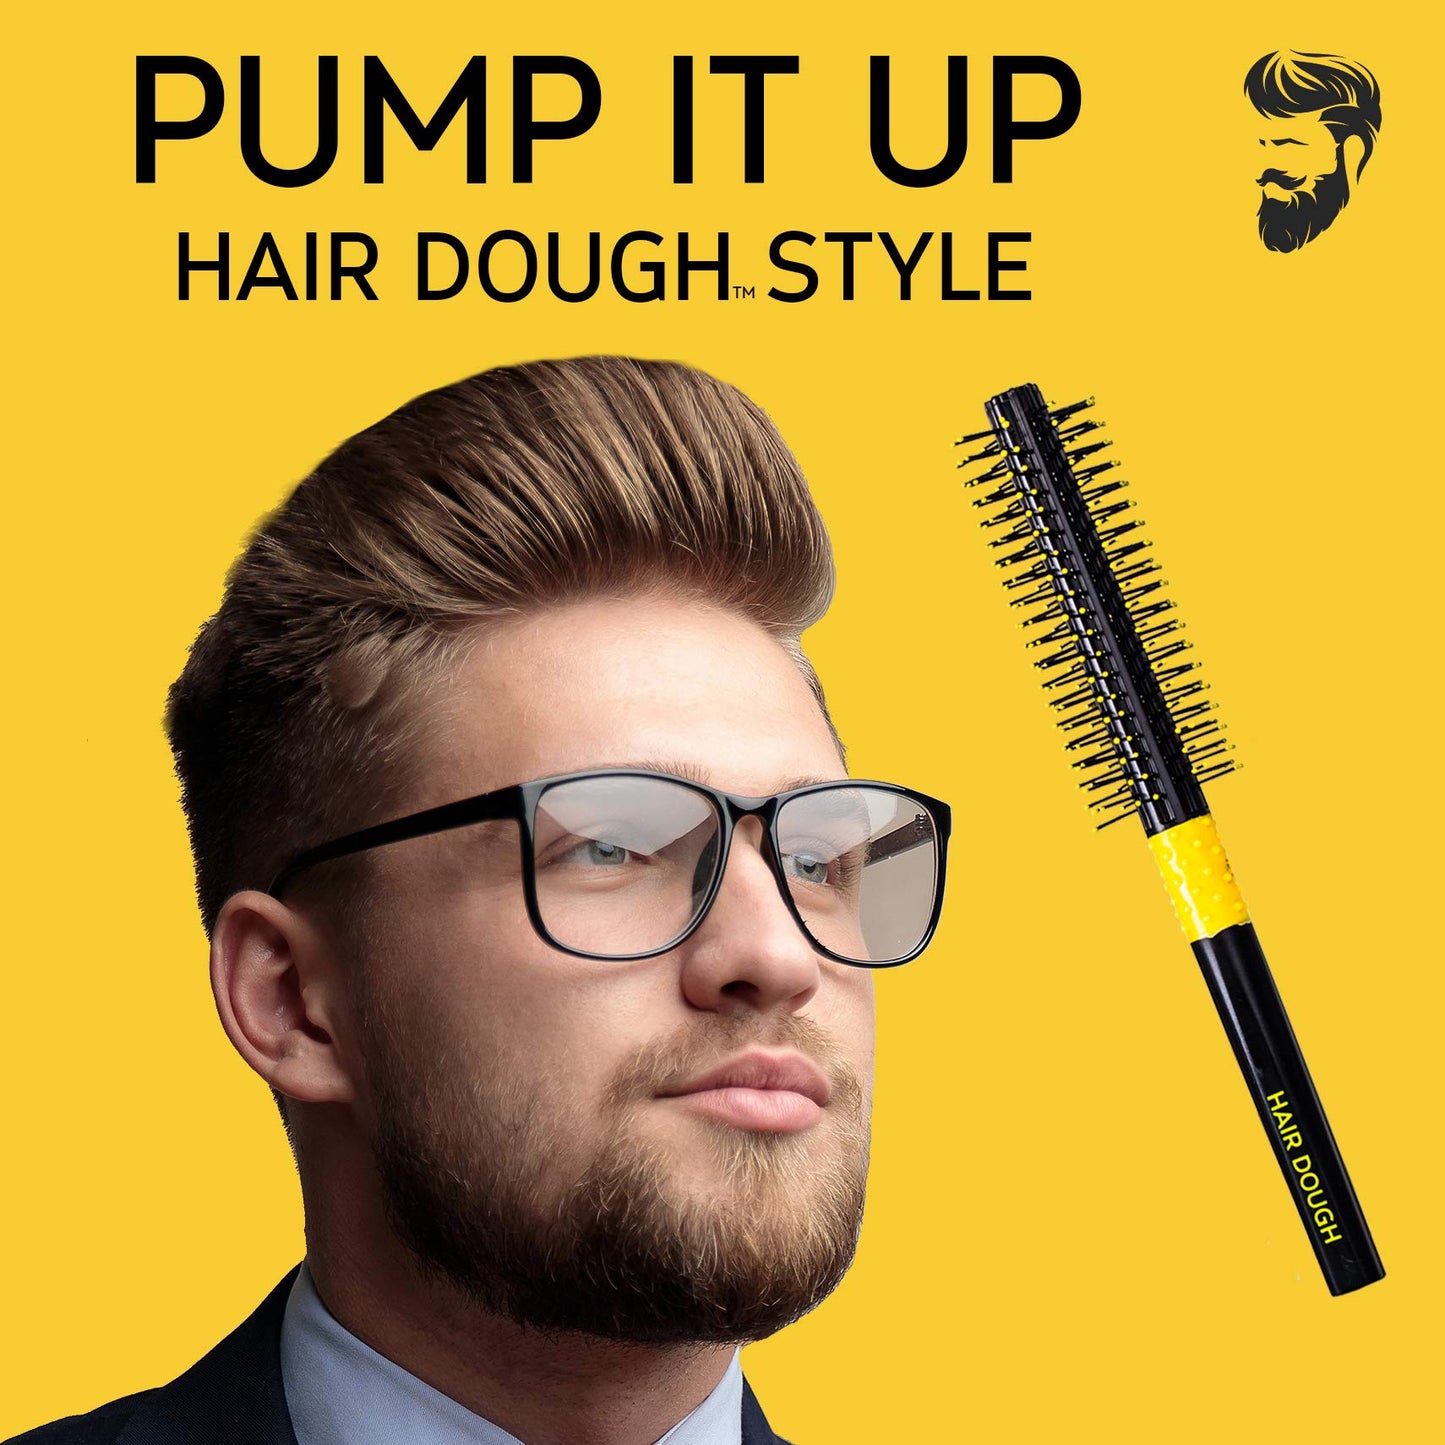 Hair Dough Quiff Roller Round Brush, Small is perfect to Style and Add Volume to any Short Hair, Roller Brush works great with Wax, Clay, Beard Balm, Pomade.